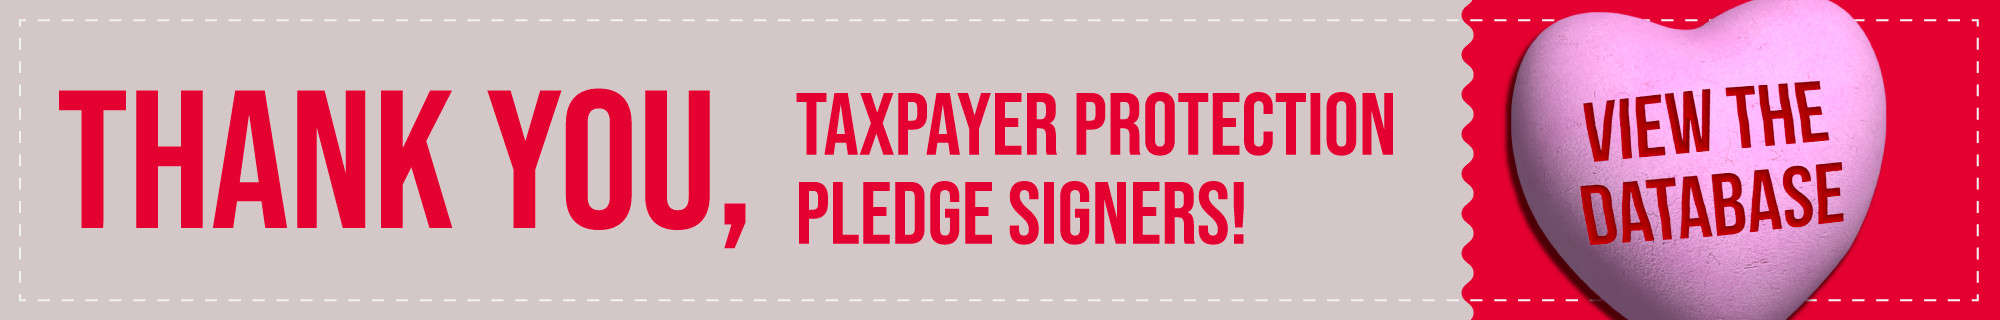 Thank You, Taxpayer Protection Pledge Signers